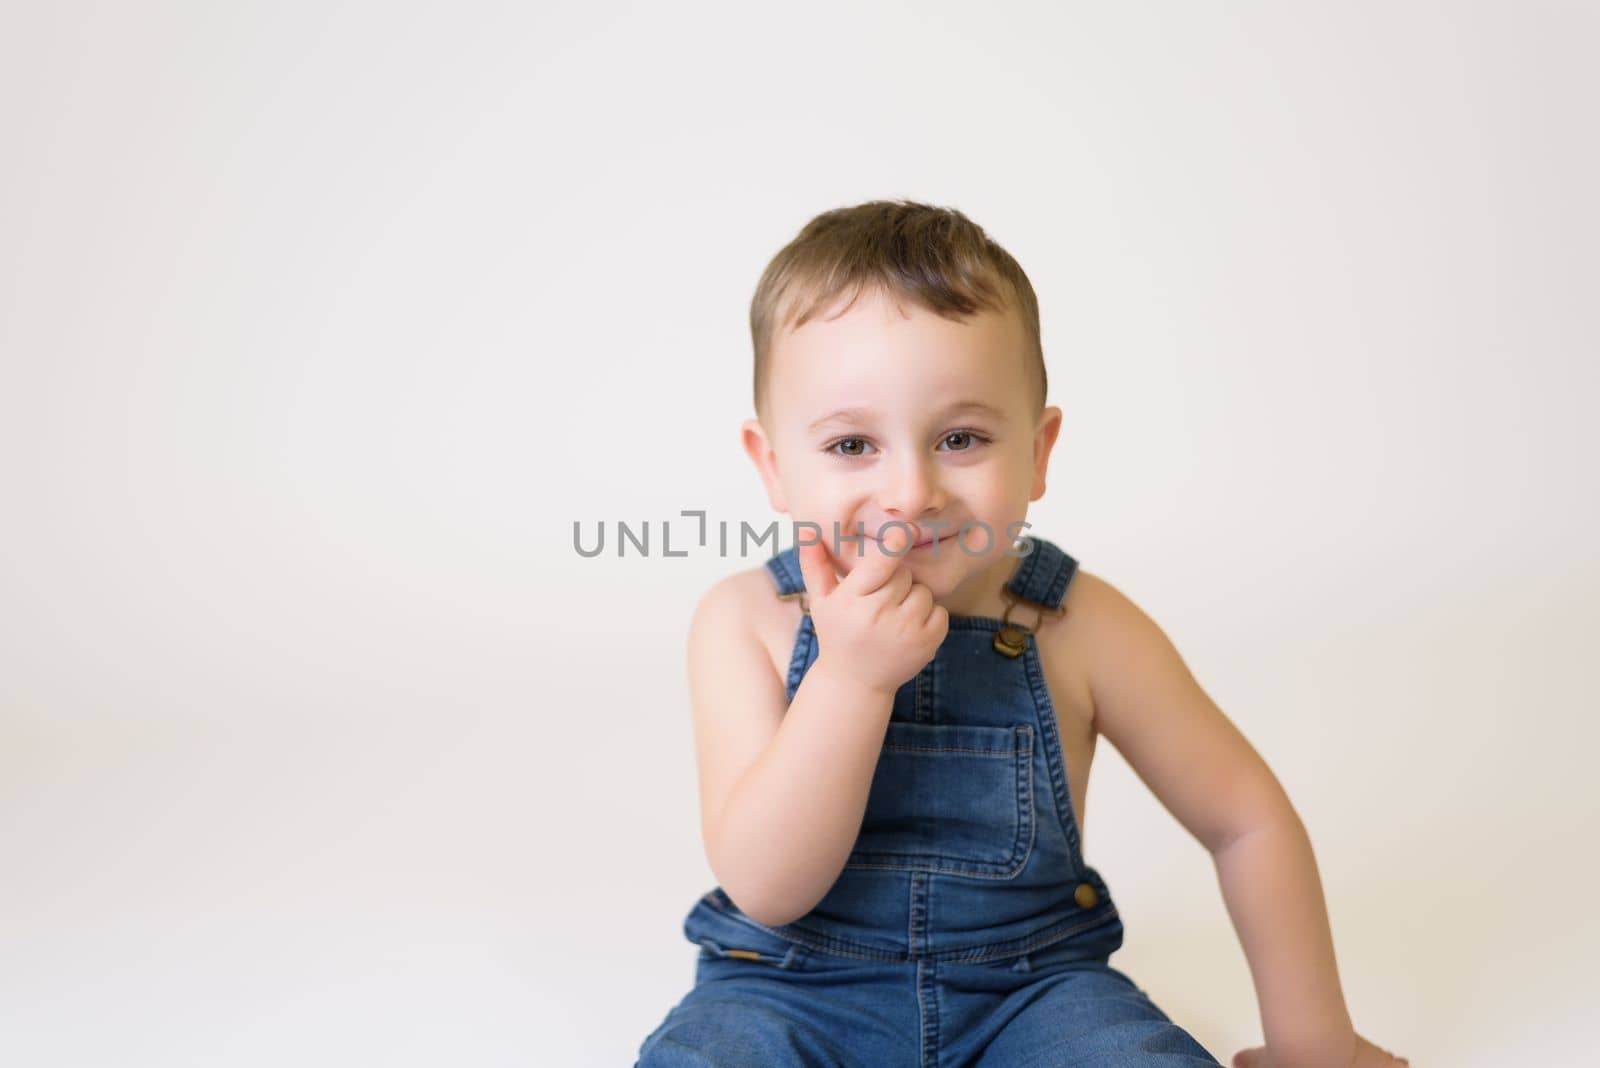 Happy child - isolated over a white background.